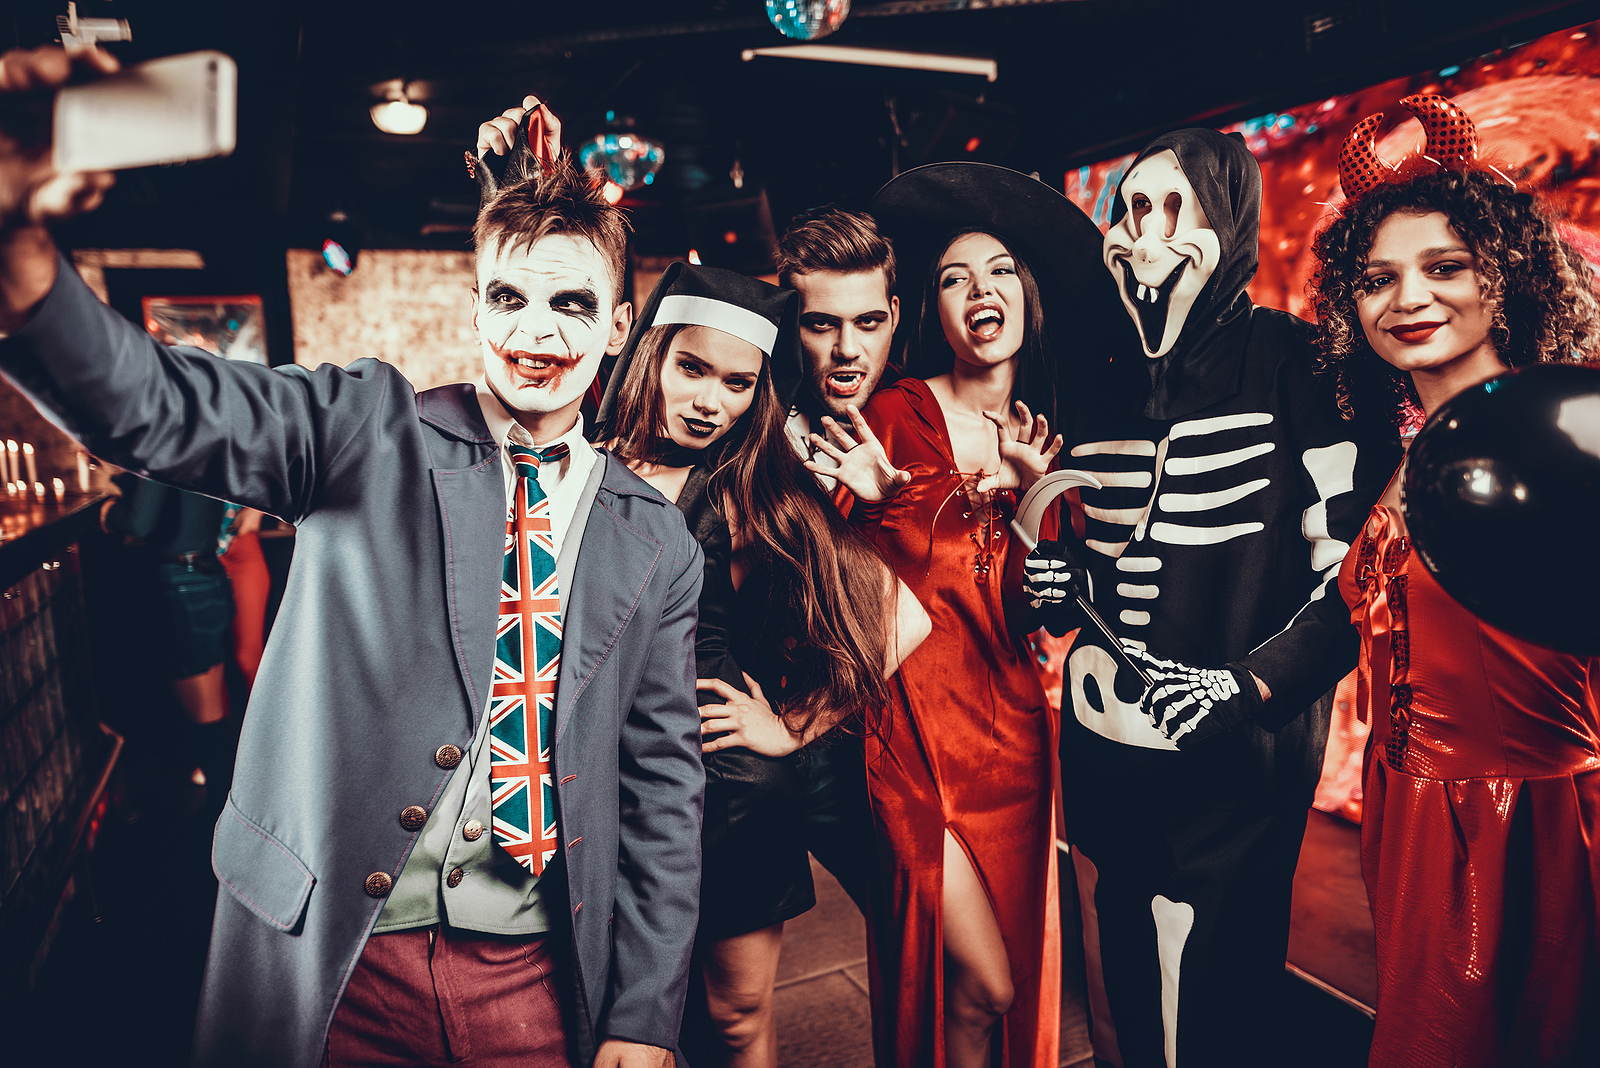 A young man takes a selfie with his friends who are in costume at a Halloween party at a bar.